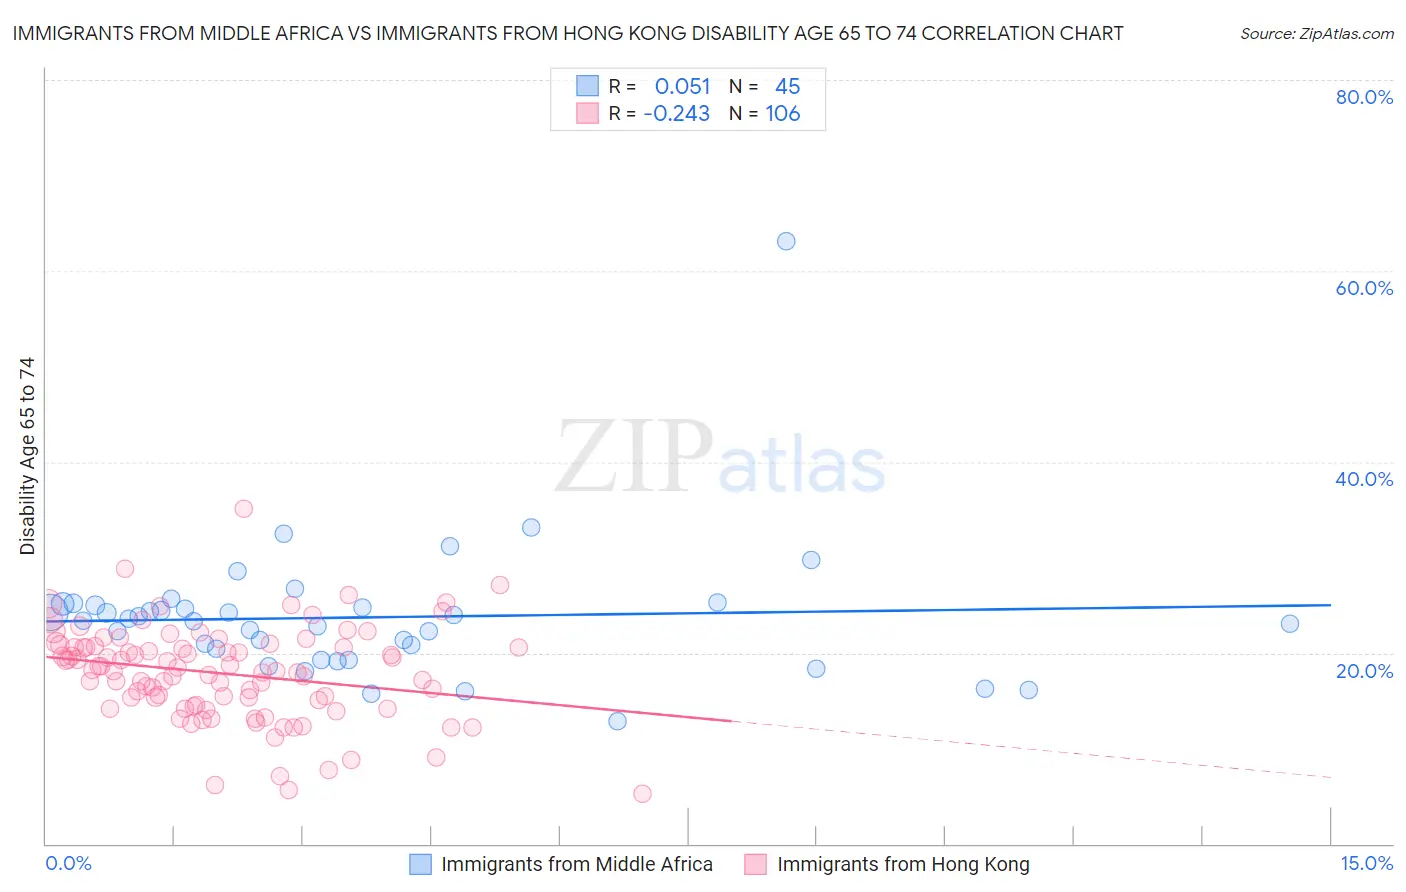 Immigrants from Middle Africa vs Immigrants from Hong Kong Disability Age 65 to 74